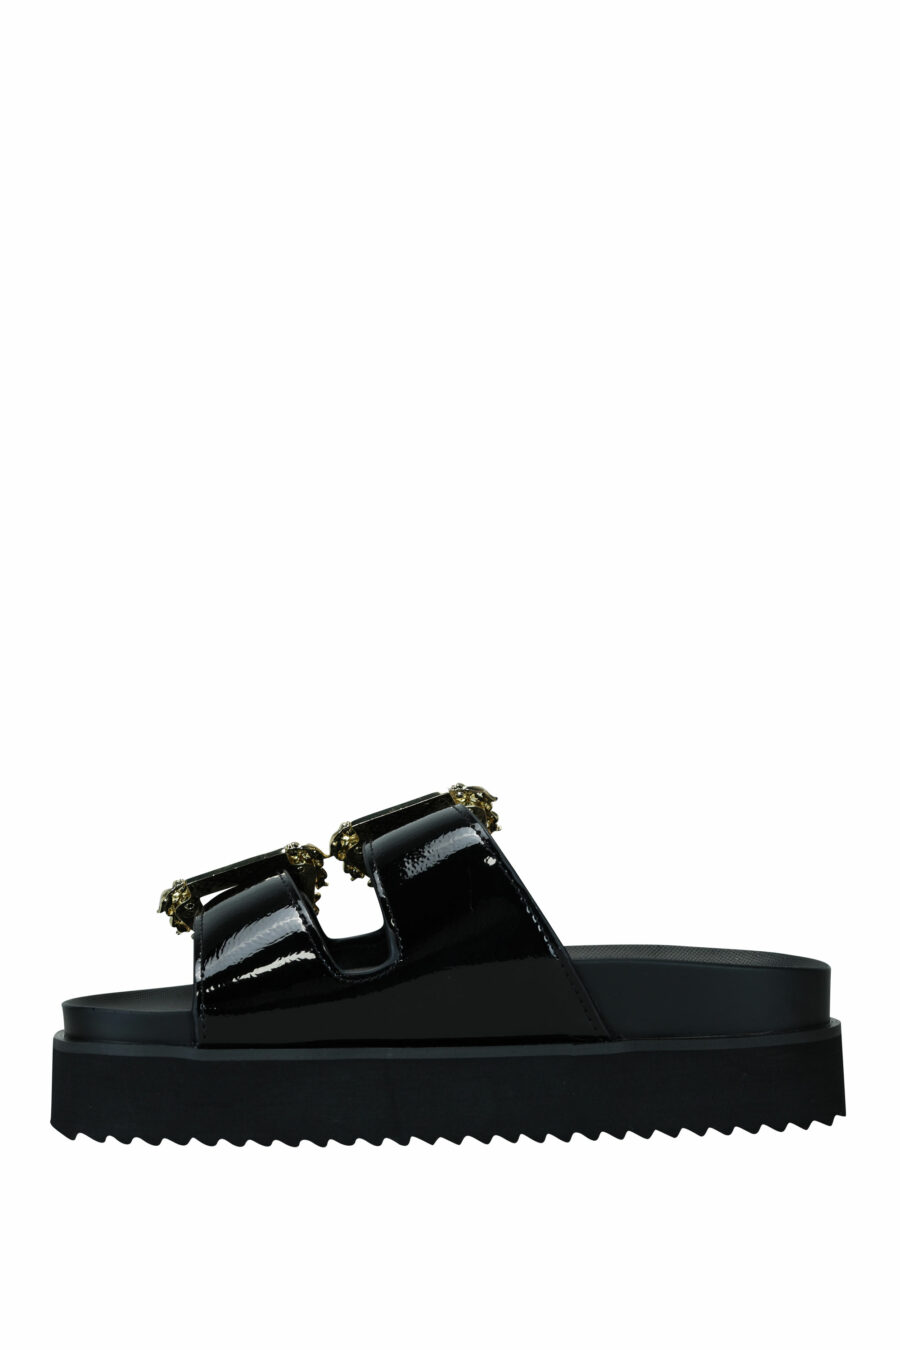 Black sandals with gold baroque double buckle - 8052019607253 2